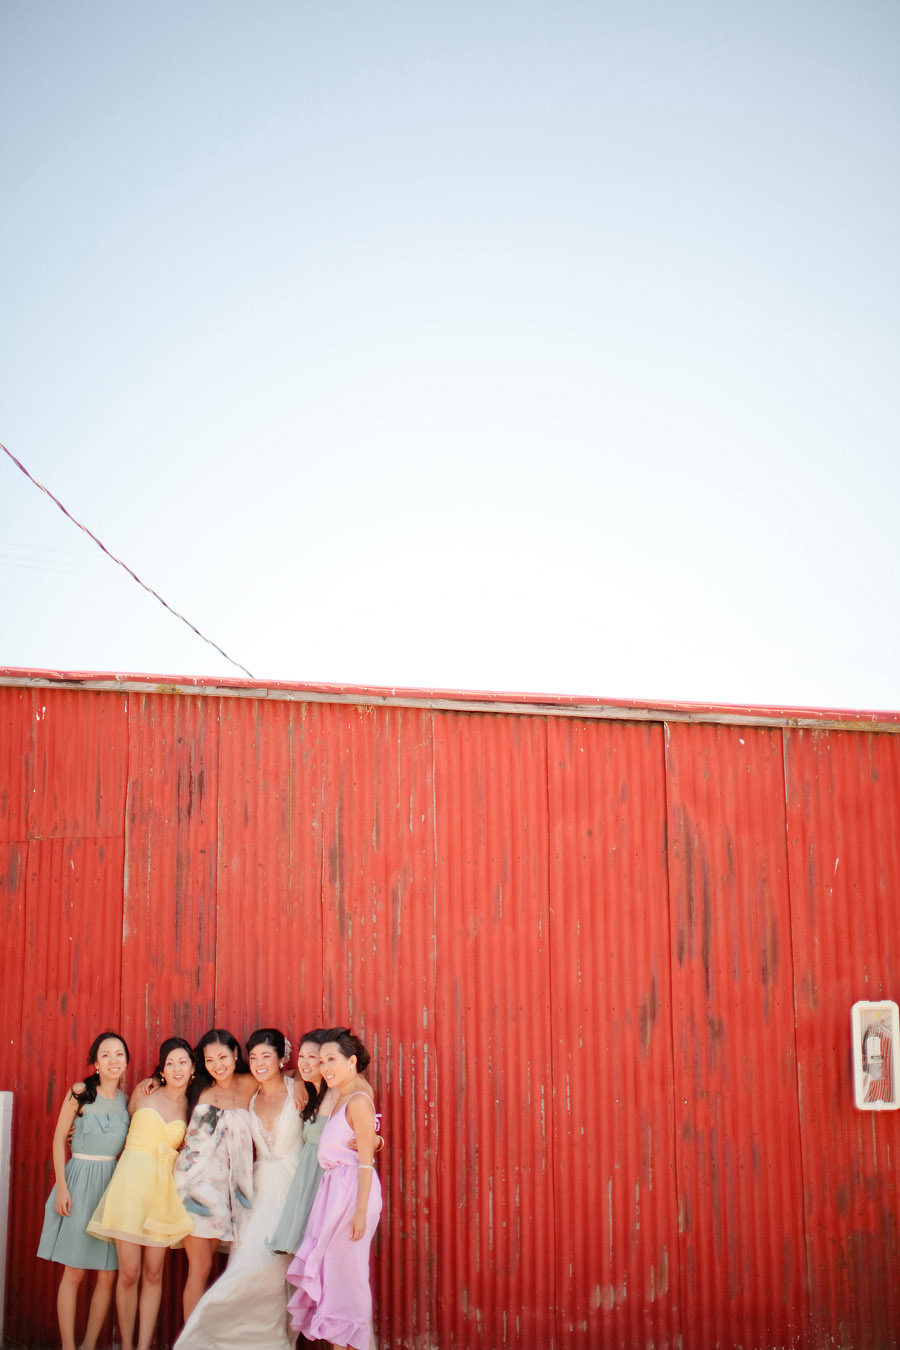 The bridal party takes pictures in front of the red barn at Santa Margarita Ranch.